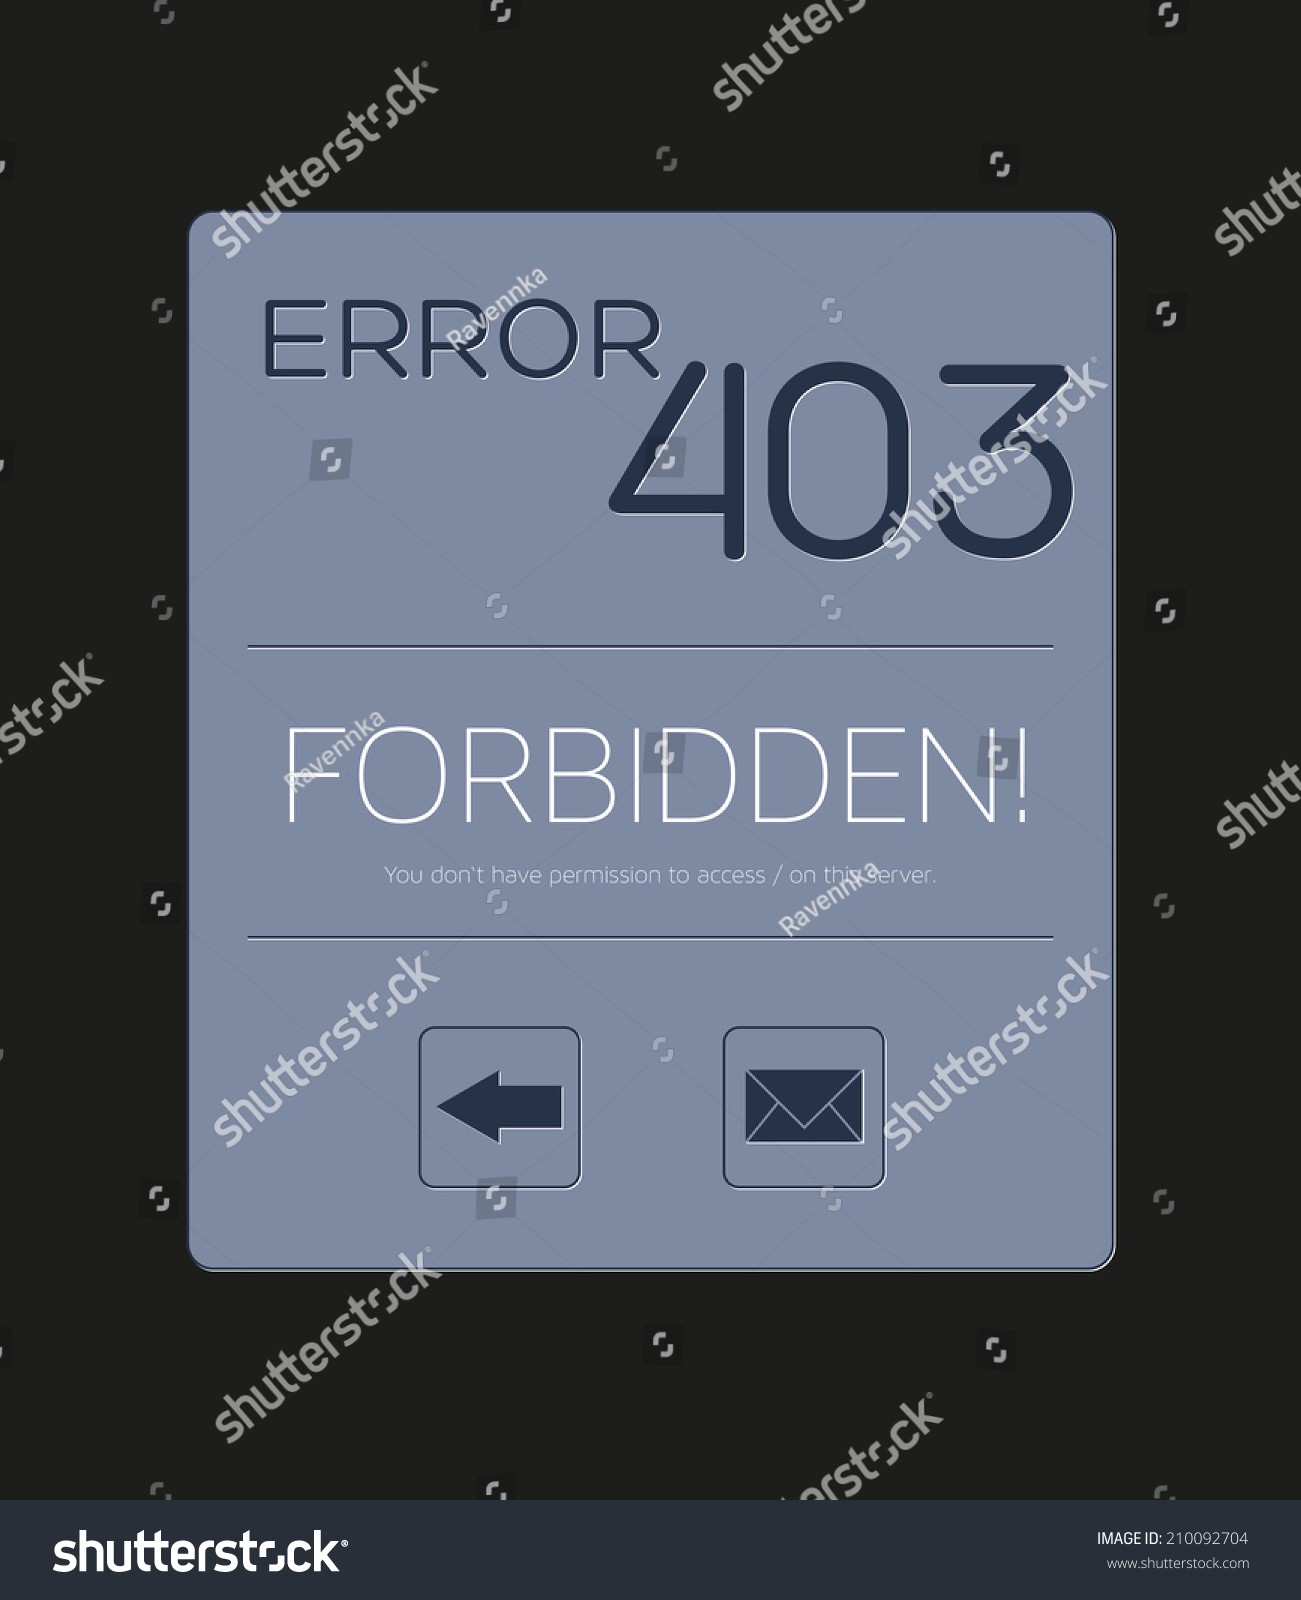 SVG of Isolated custom Error 403 - Forbidden with text and buttons for back and contact svg